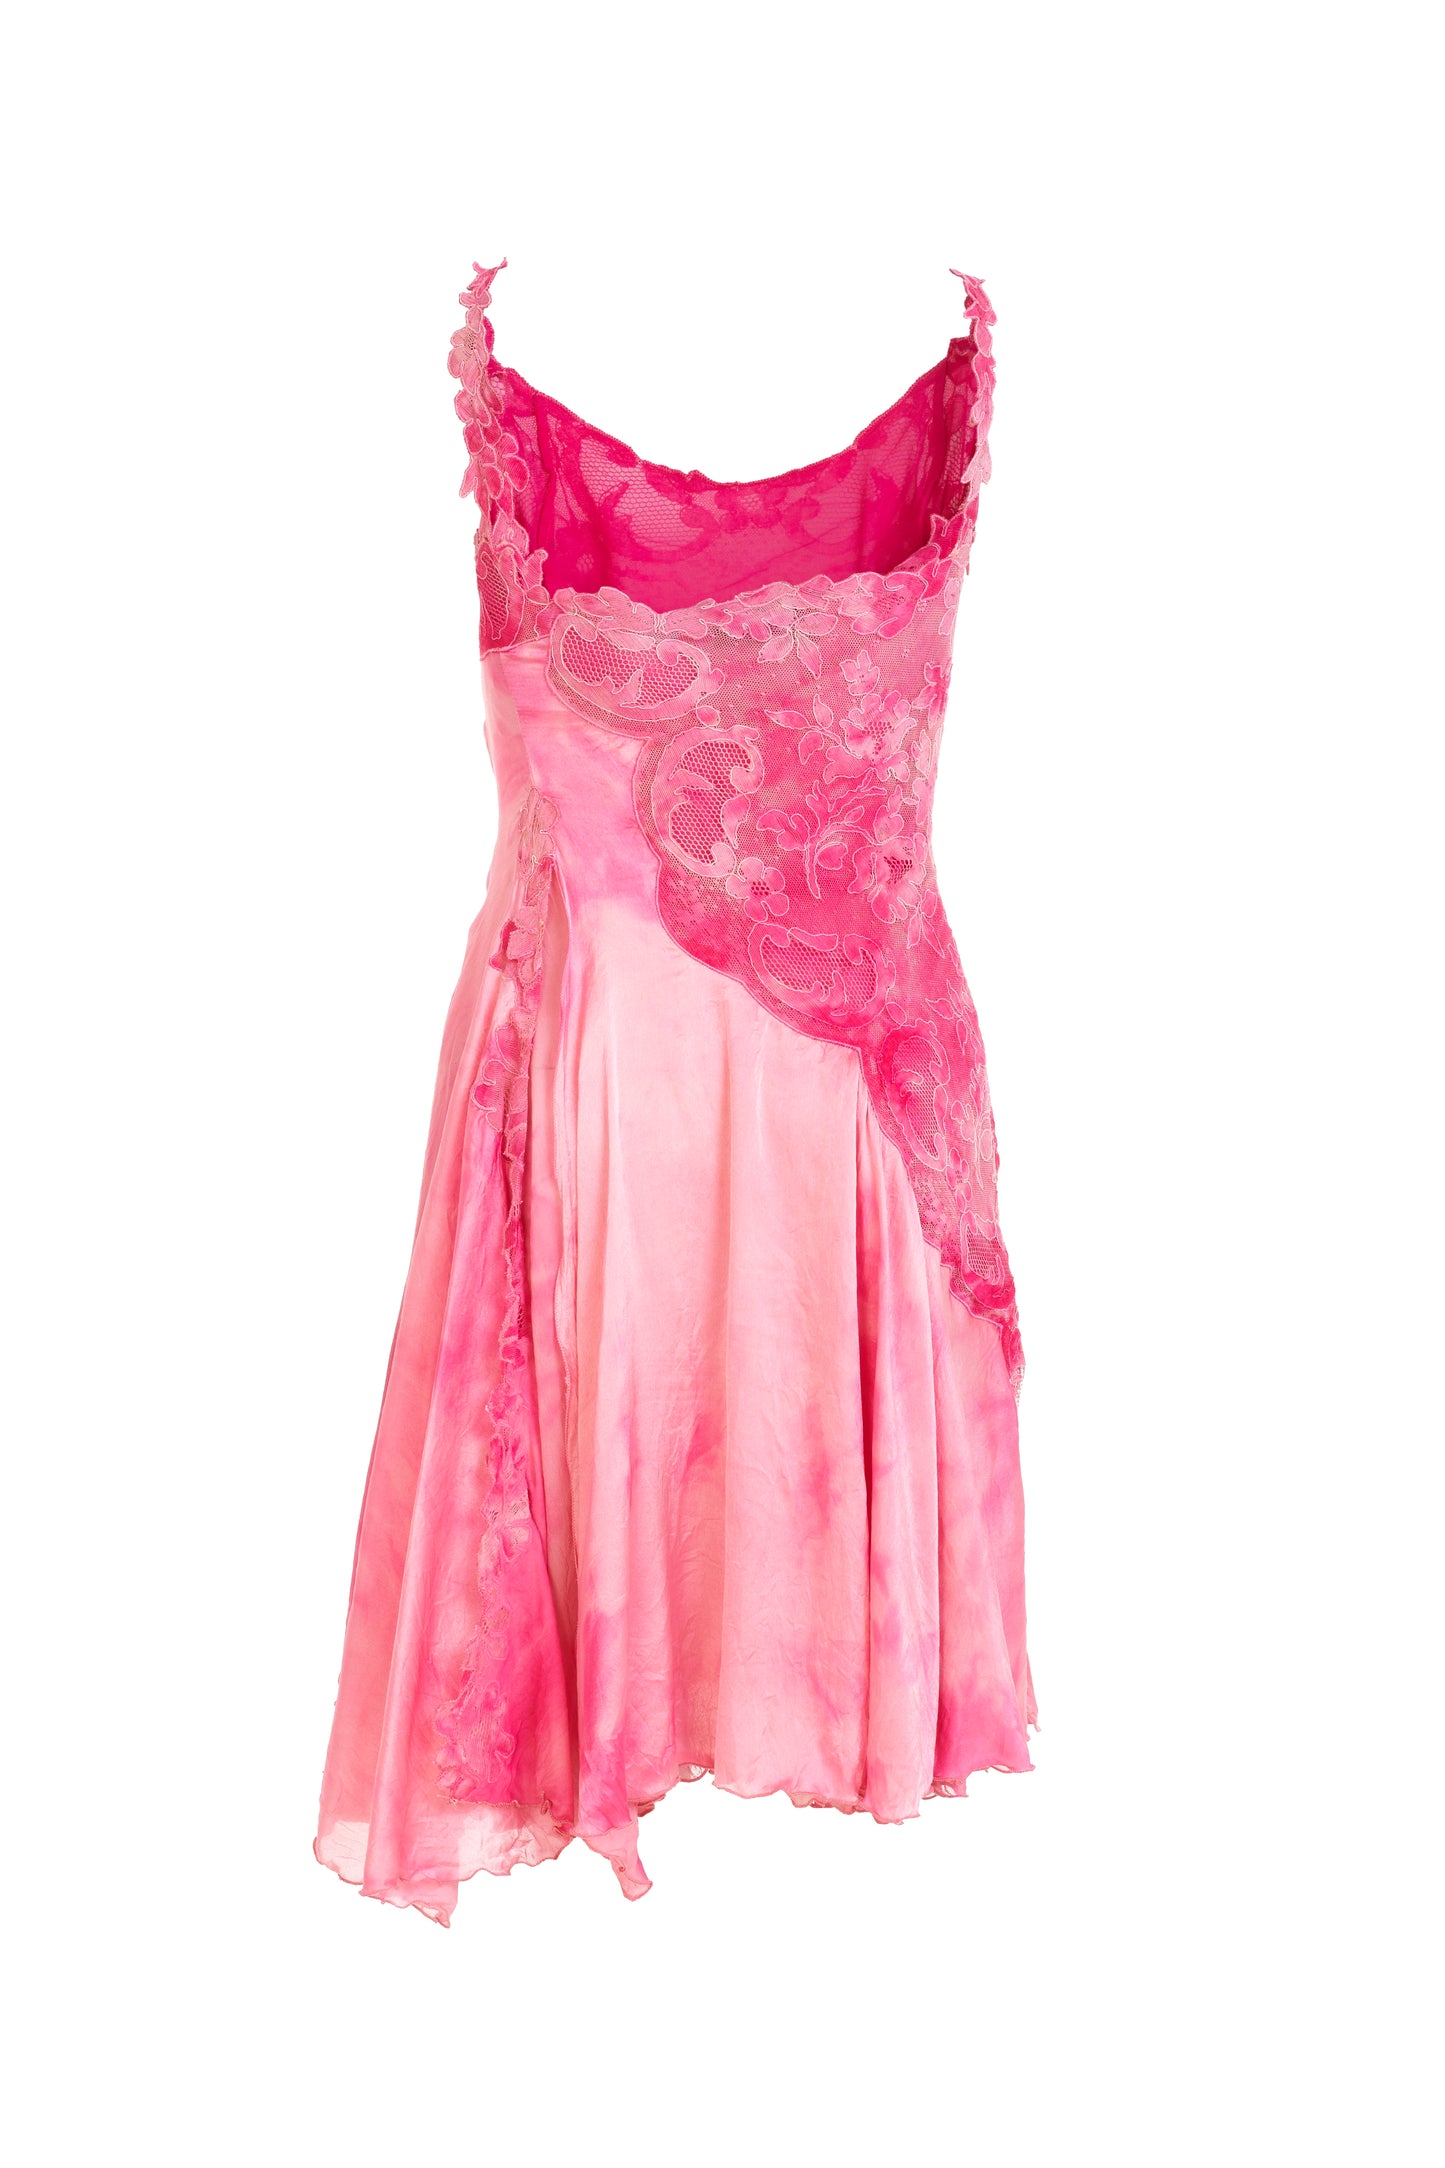 Gianni Versace Couture rose pink floral toile embroidered dress